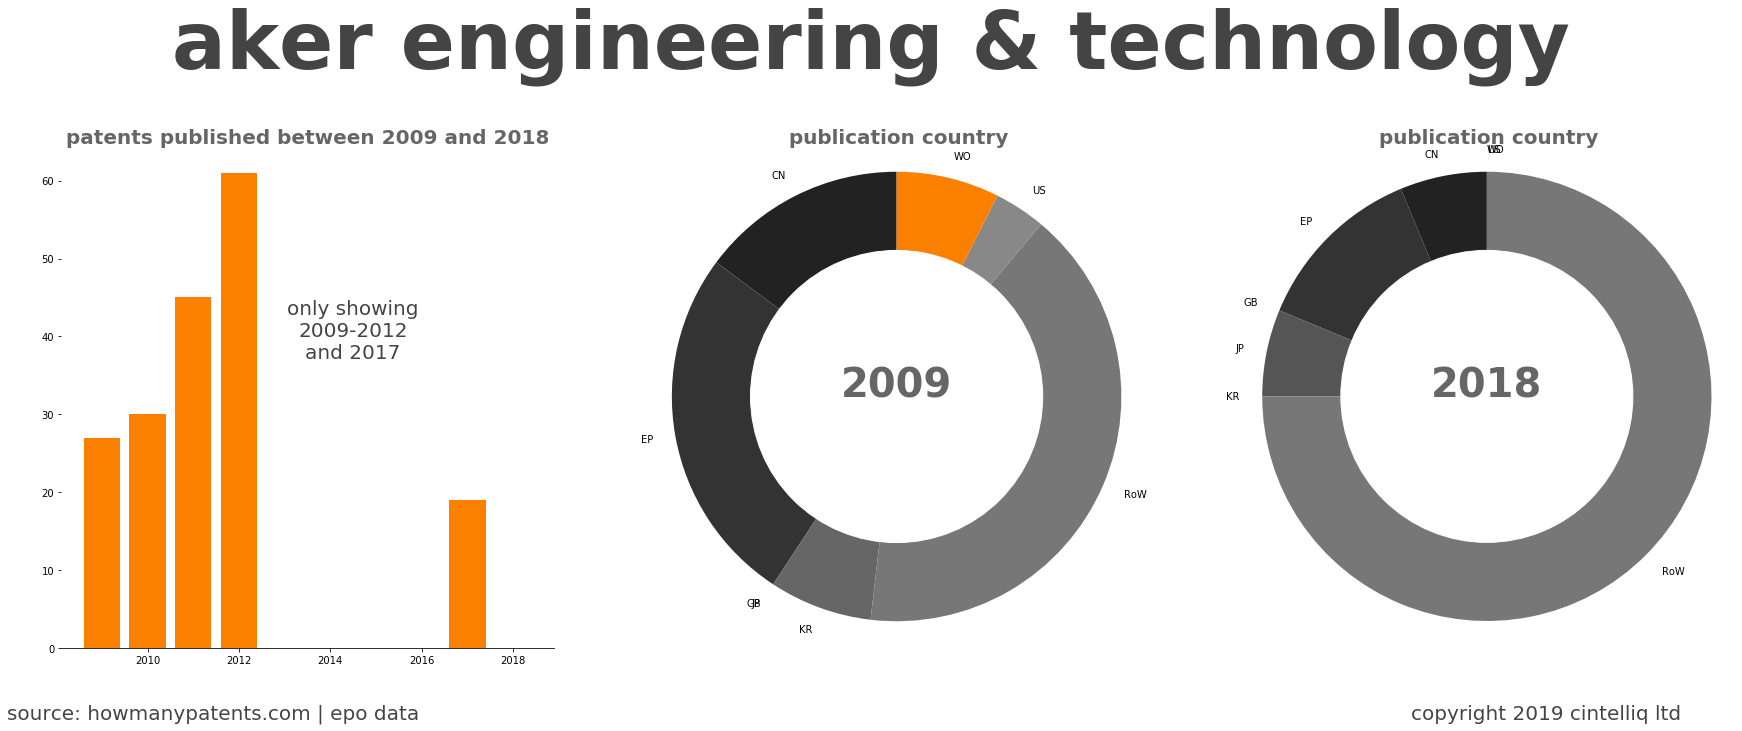 summary of patents for Aker Engineering & Technology